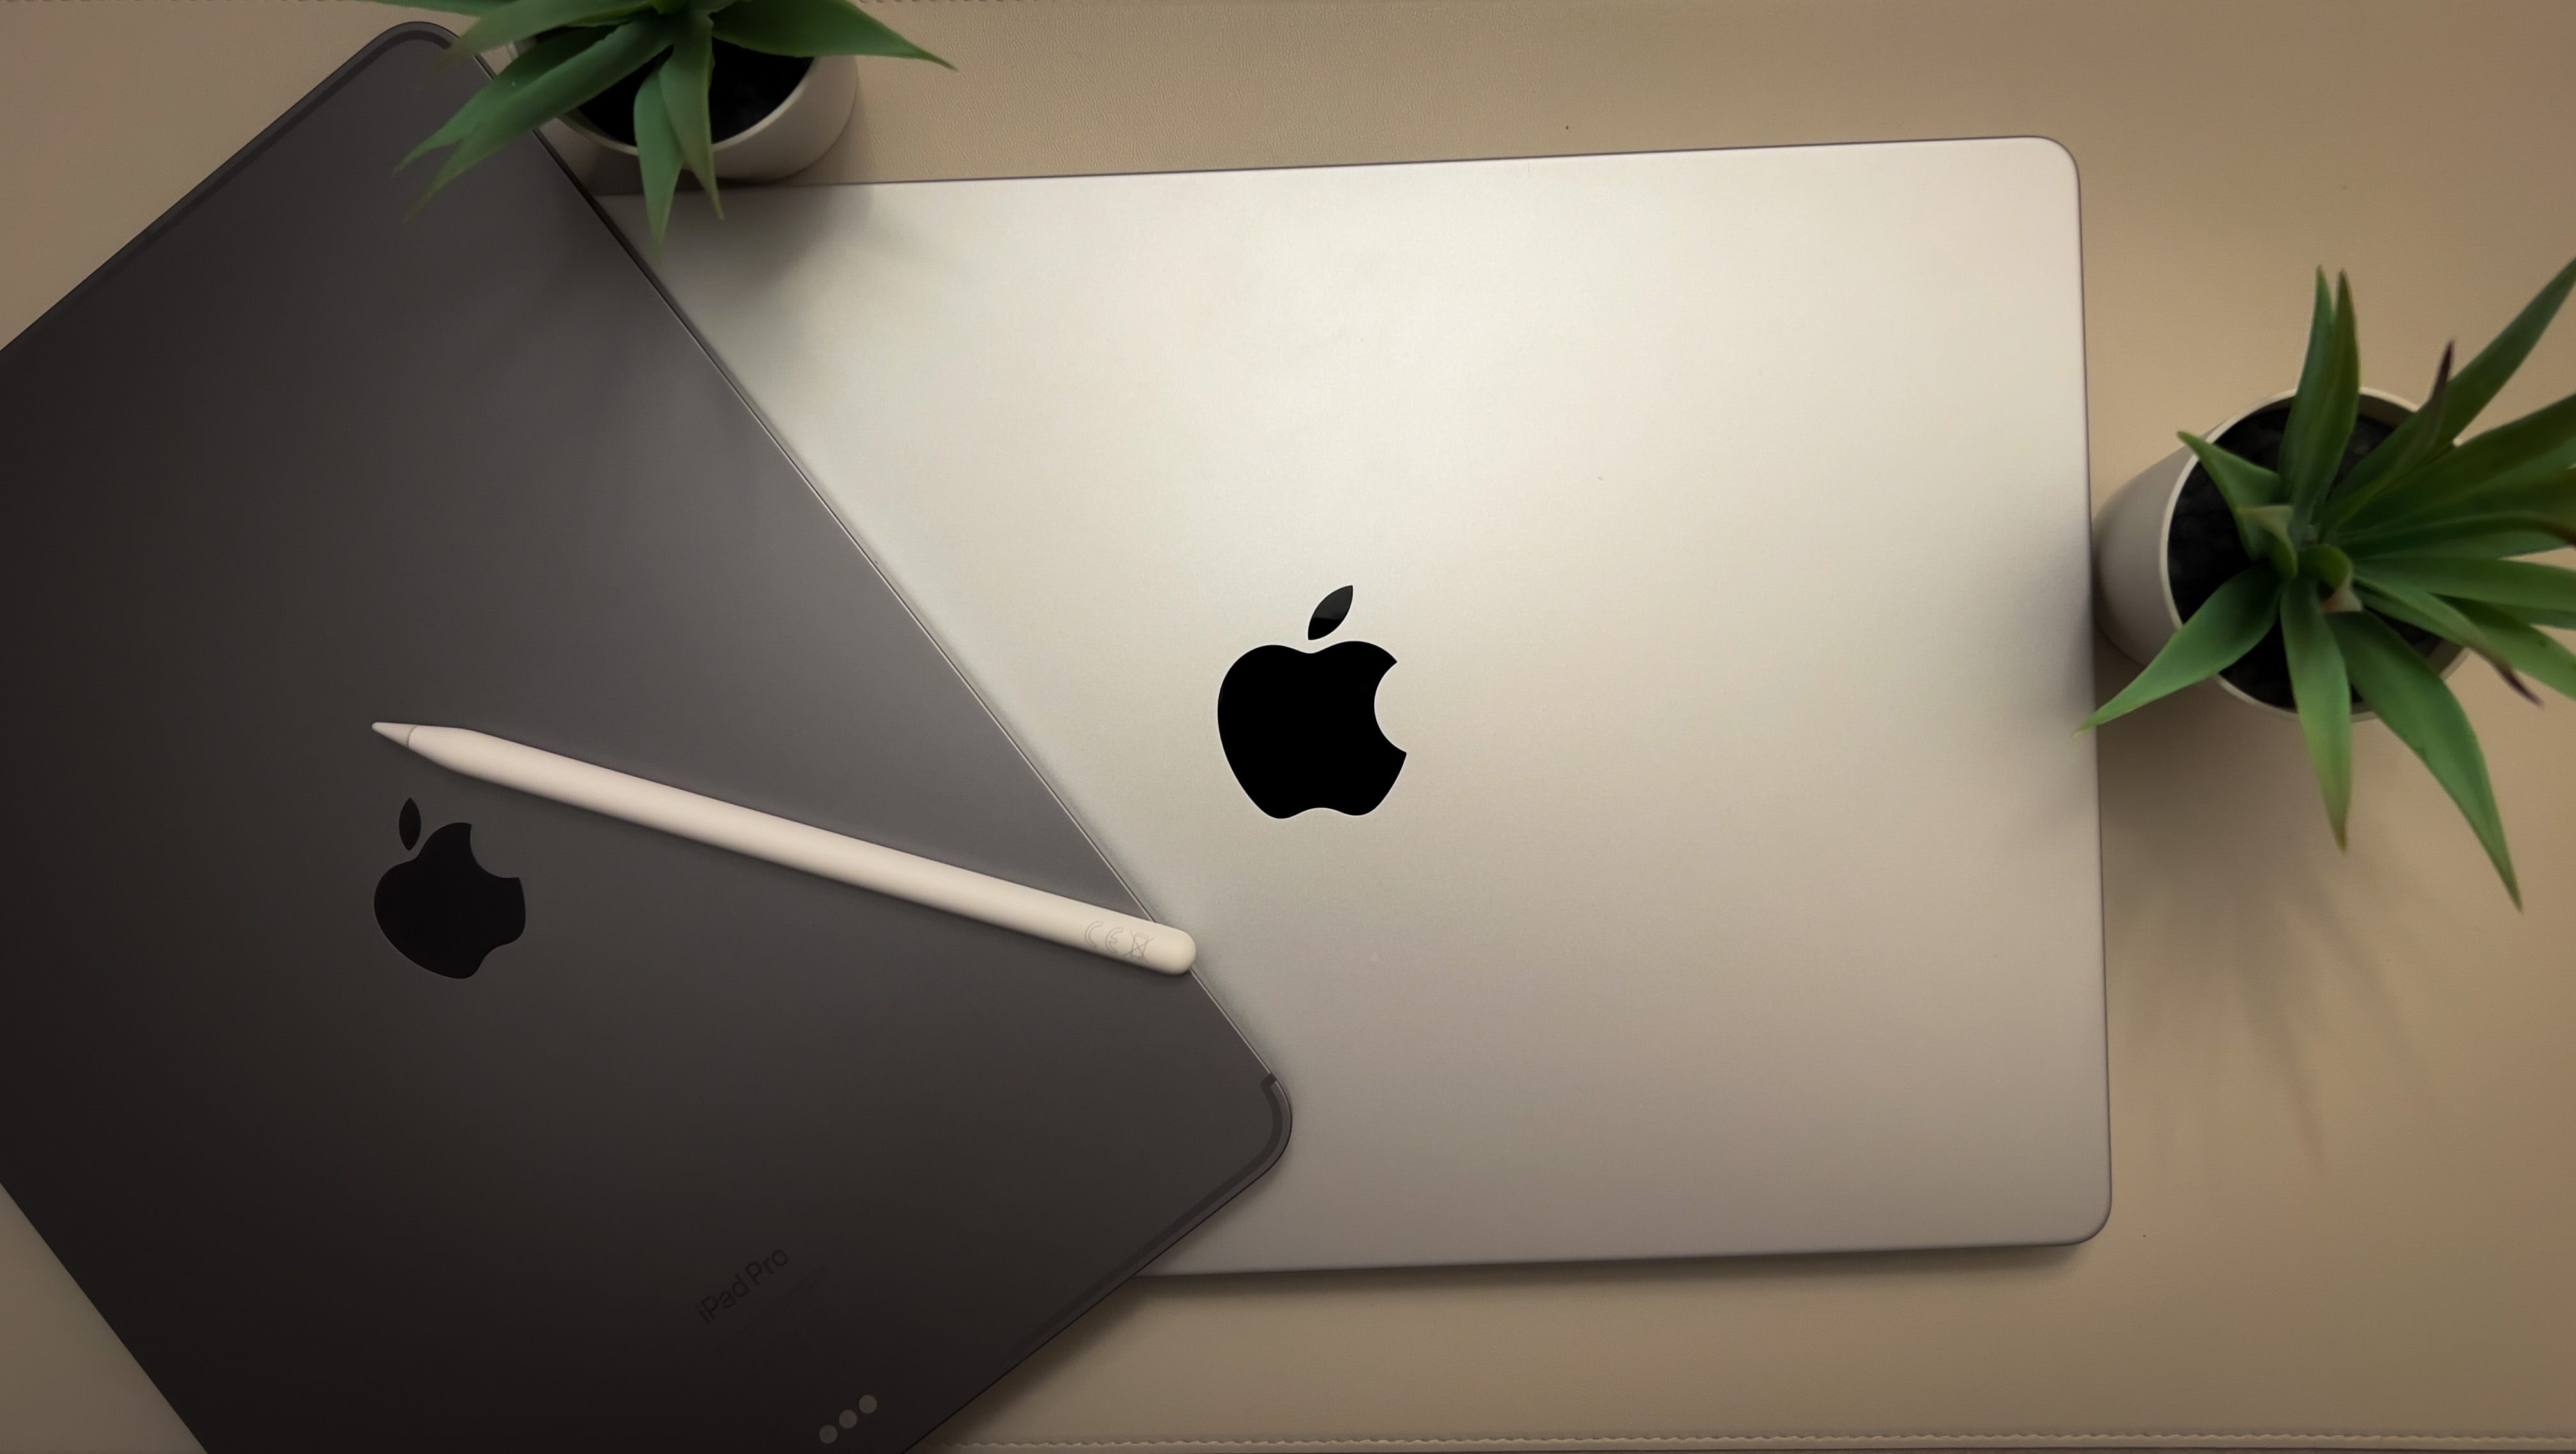 Why I finally switched from iPad Pro to MacBook | by Tobias Hedtke | Medium